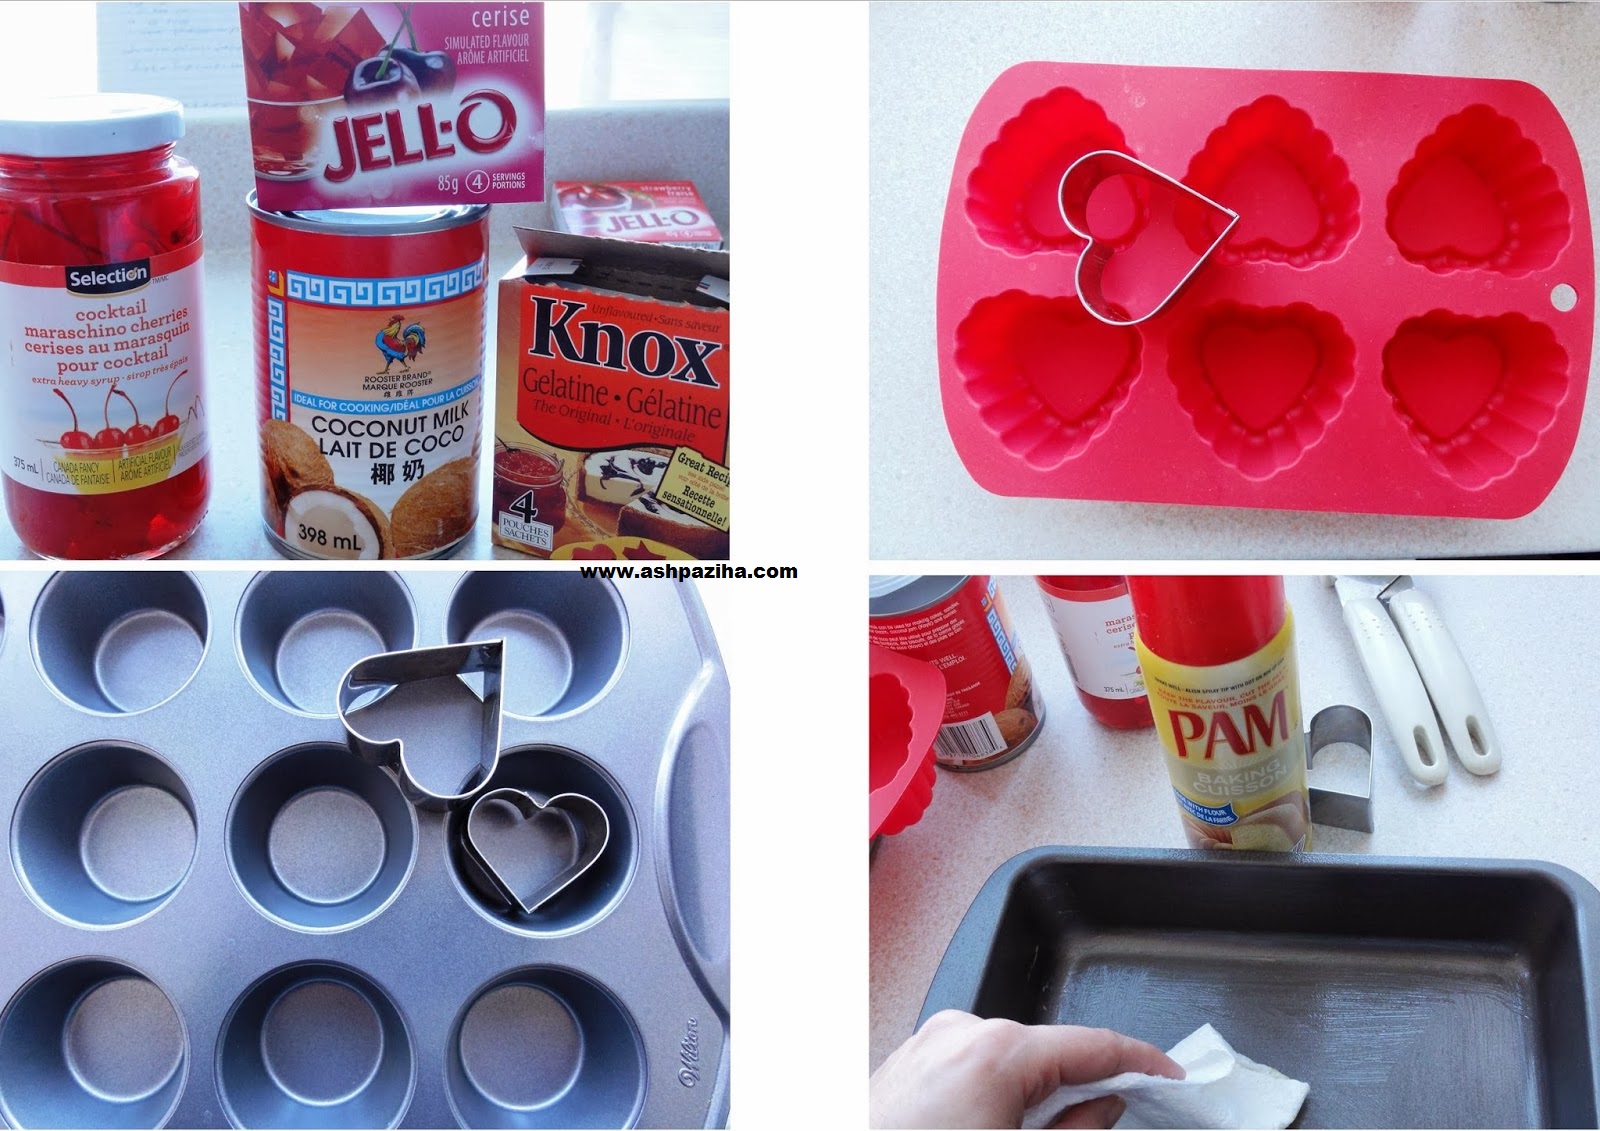 Mode - preparation - Jelly - heart - shaped - with - Cherry - Specials - Valentine (5)